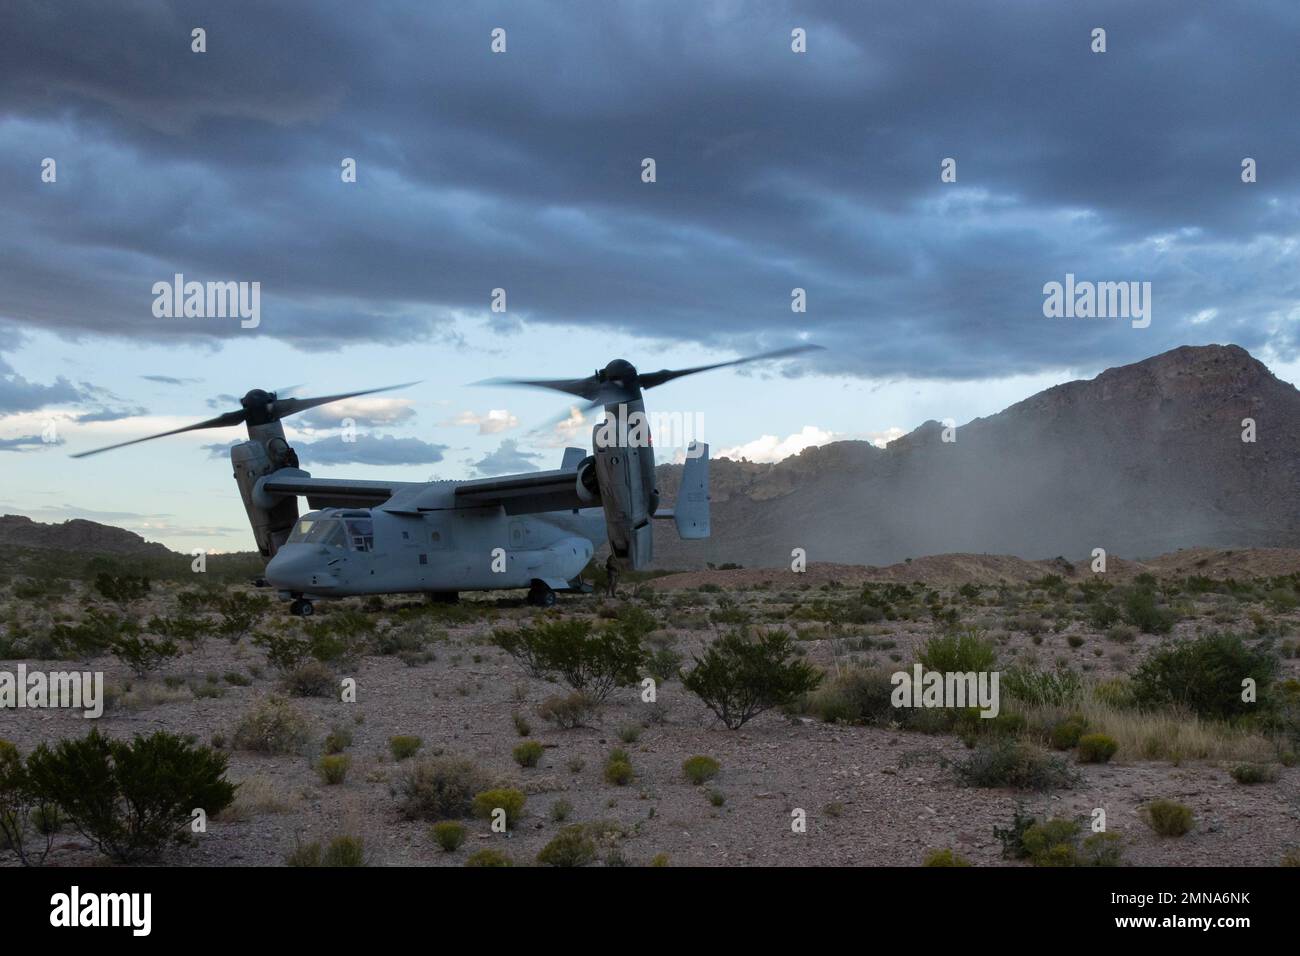 A U.S. Marine Corps MV-22B Osprey assigned to Marine Aviation Weapons and Tactics Squadron One (MAWTS-1) lands during Weapons and Tactics Instructor (WTI) course 1-23 near Playas, New Mexico, Sept. 30, 2022. WTI is a seven-week training event hosted by MAWTS-1, providing standardized advanced tactical training and certification of unit instructor qualifications to support Marine aviation training and readiness, and assists in developing and employing aviation weapons and tactics. Stock Photo